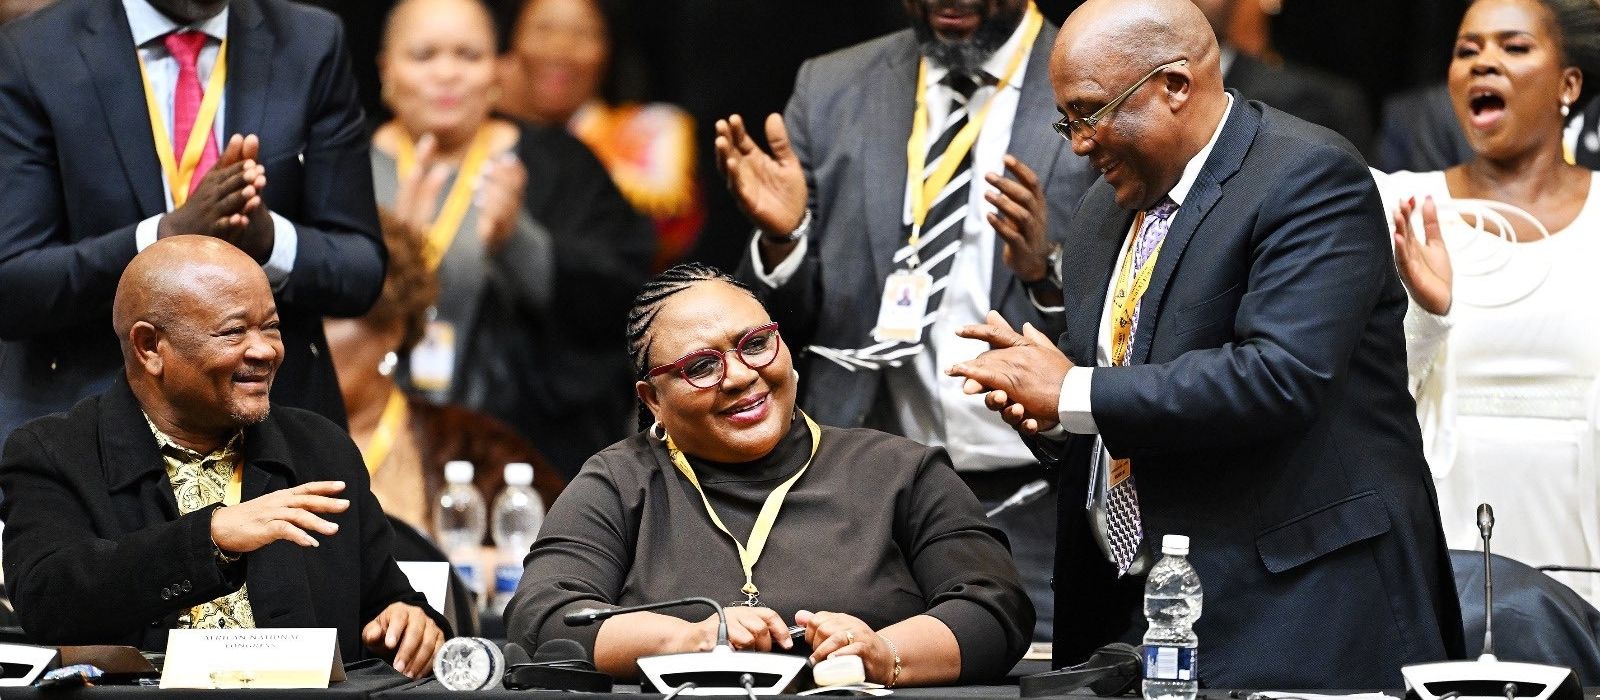 South Africa elects Thoko Didiza as speaker of parliament